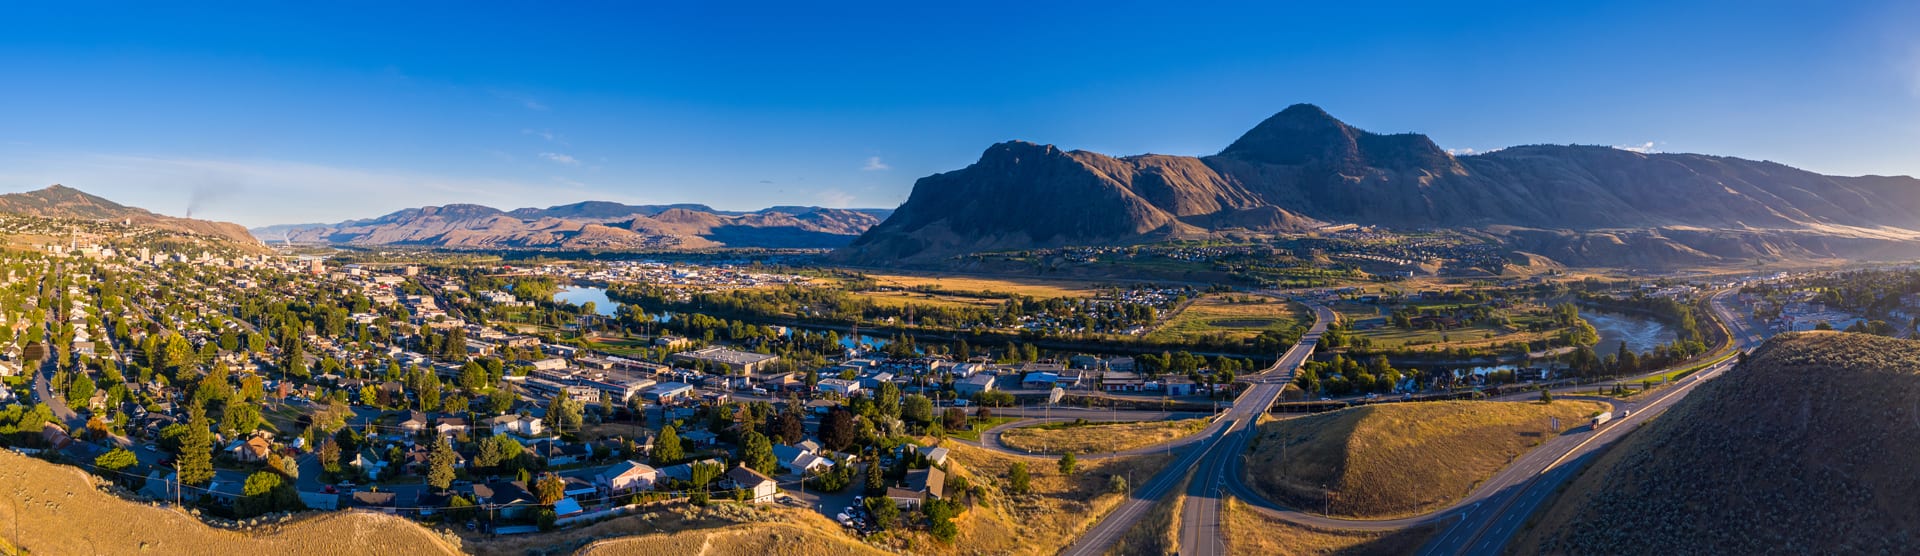 Kamloops City and Mountains Photography